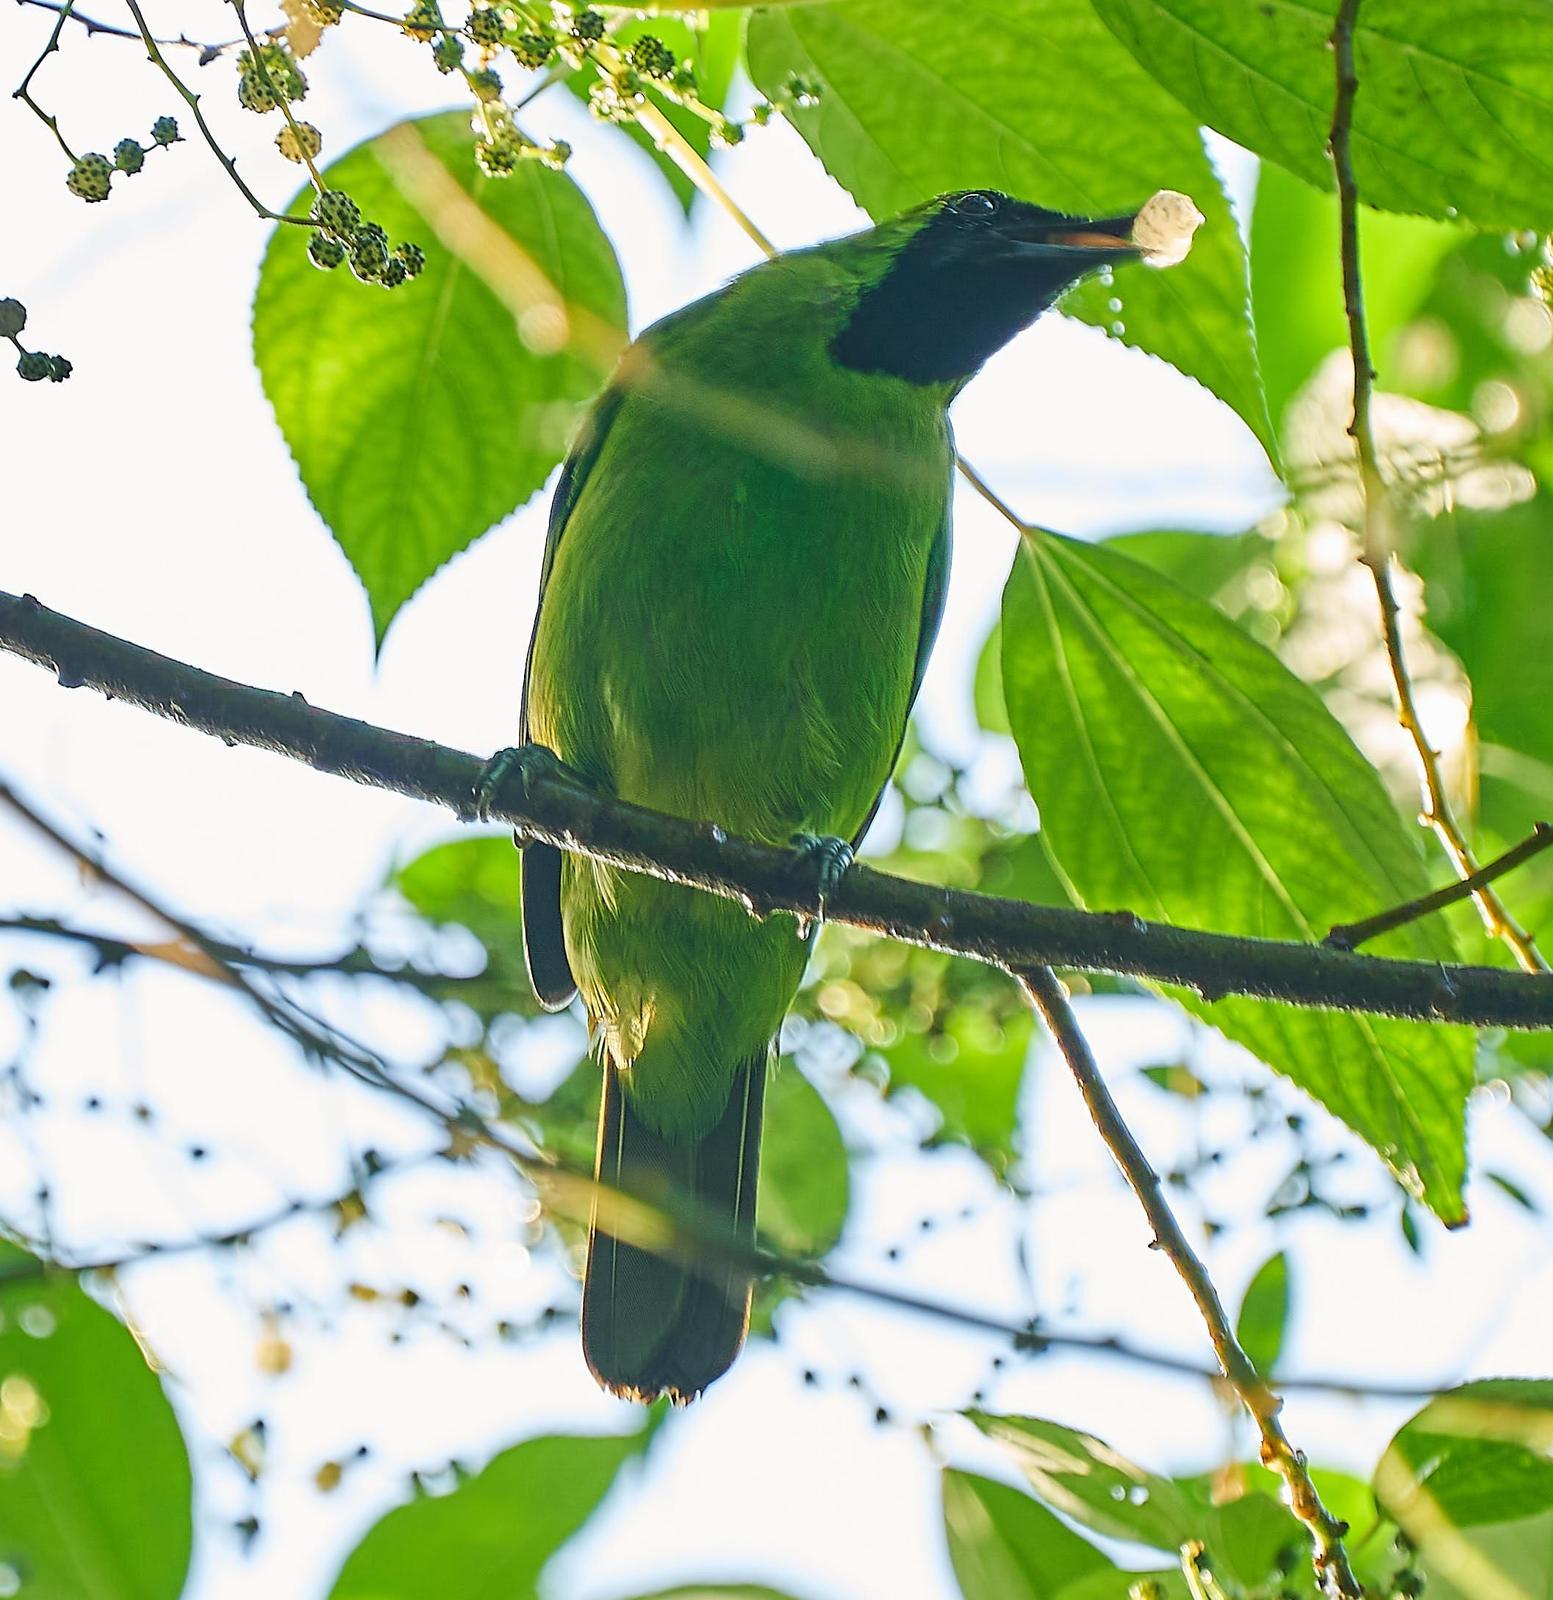 Greater Green Leafbird Photo by Steven Cheong